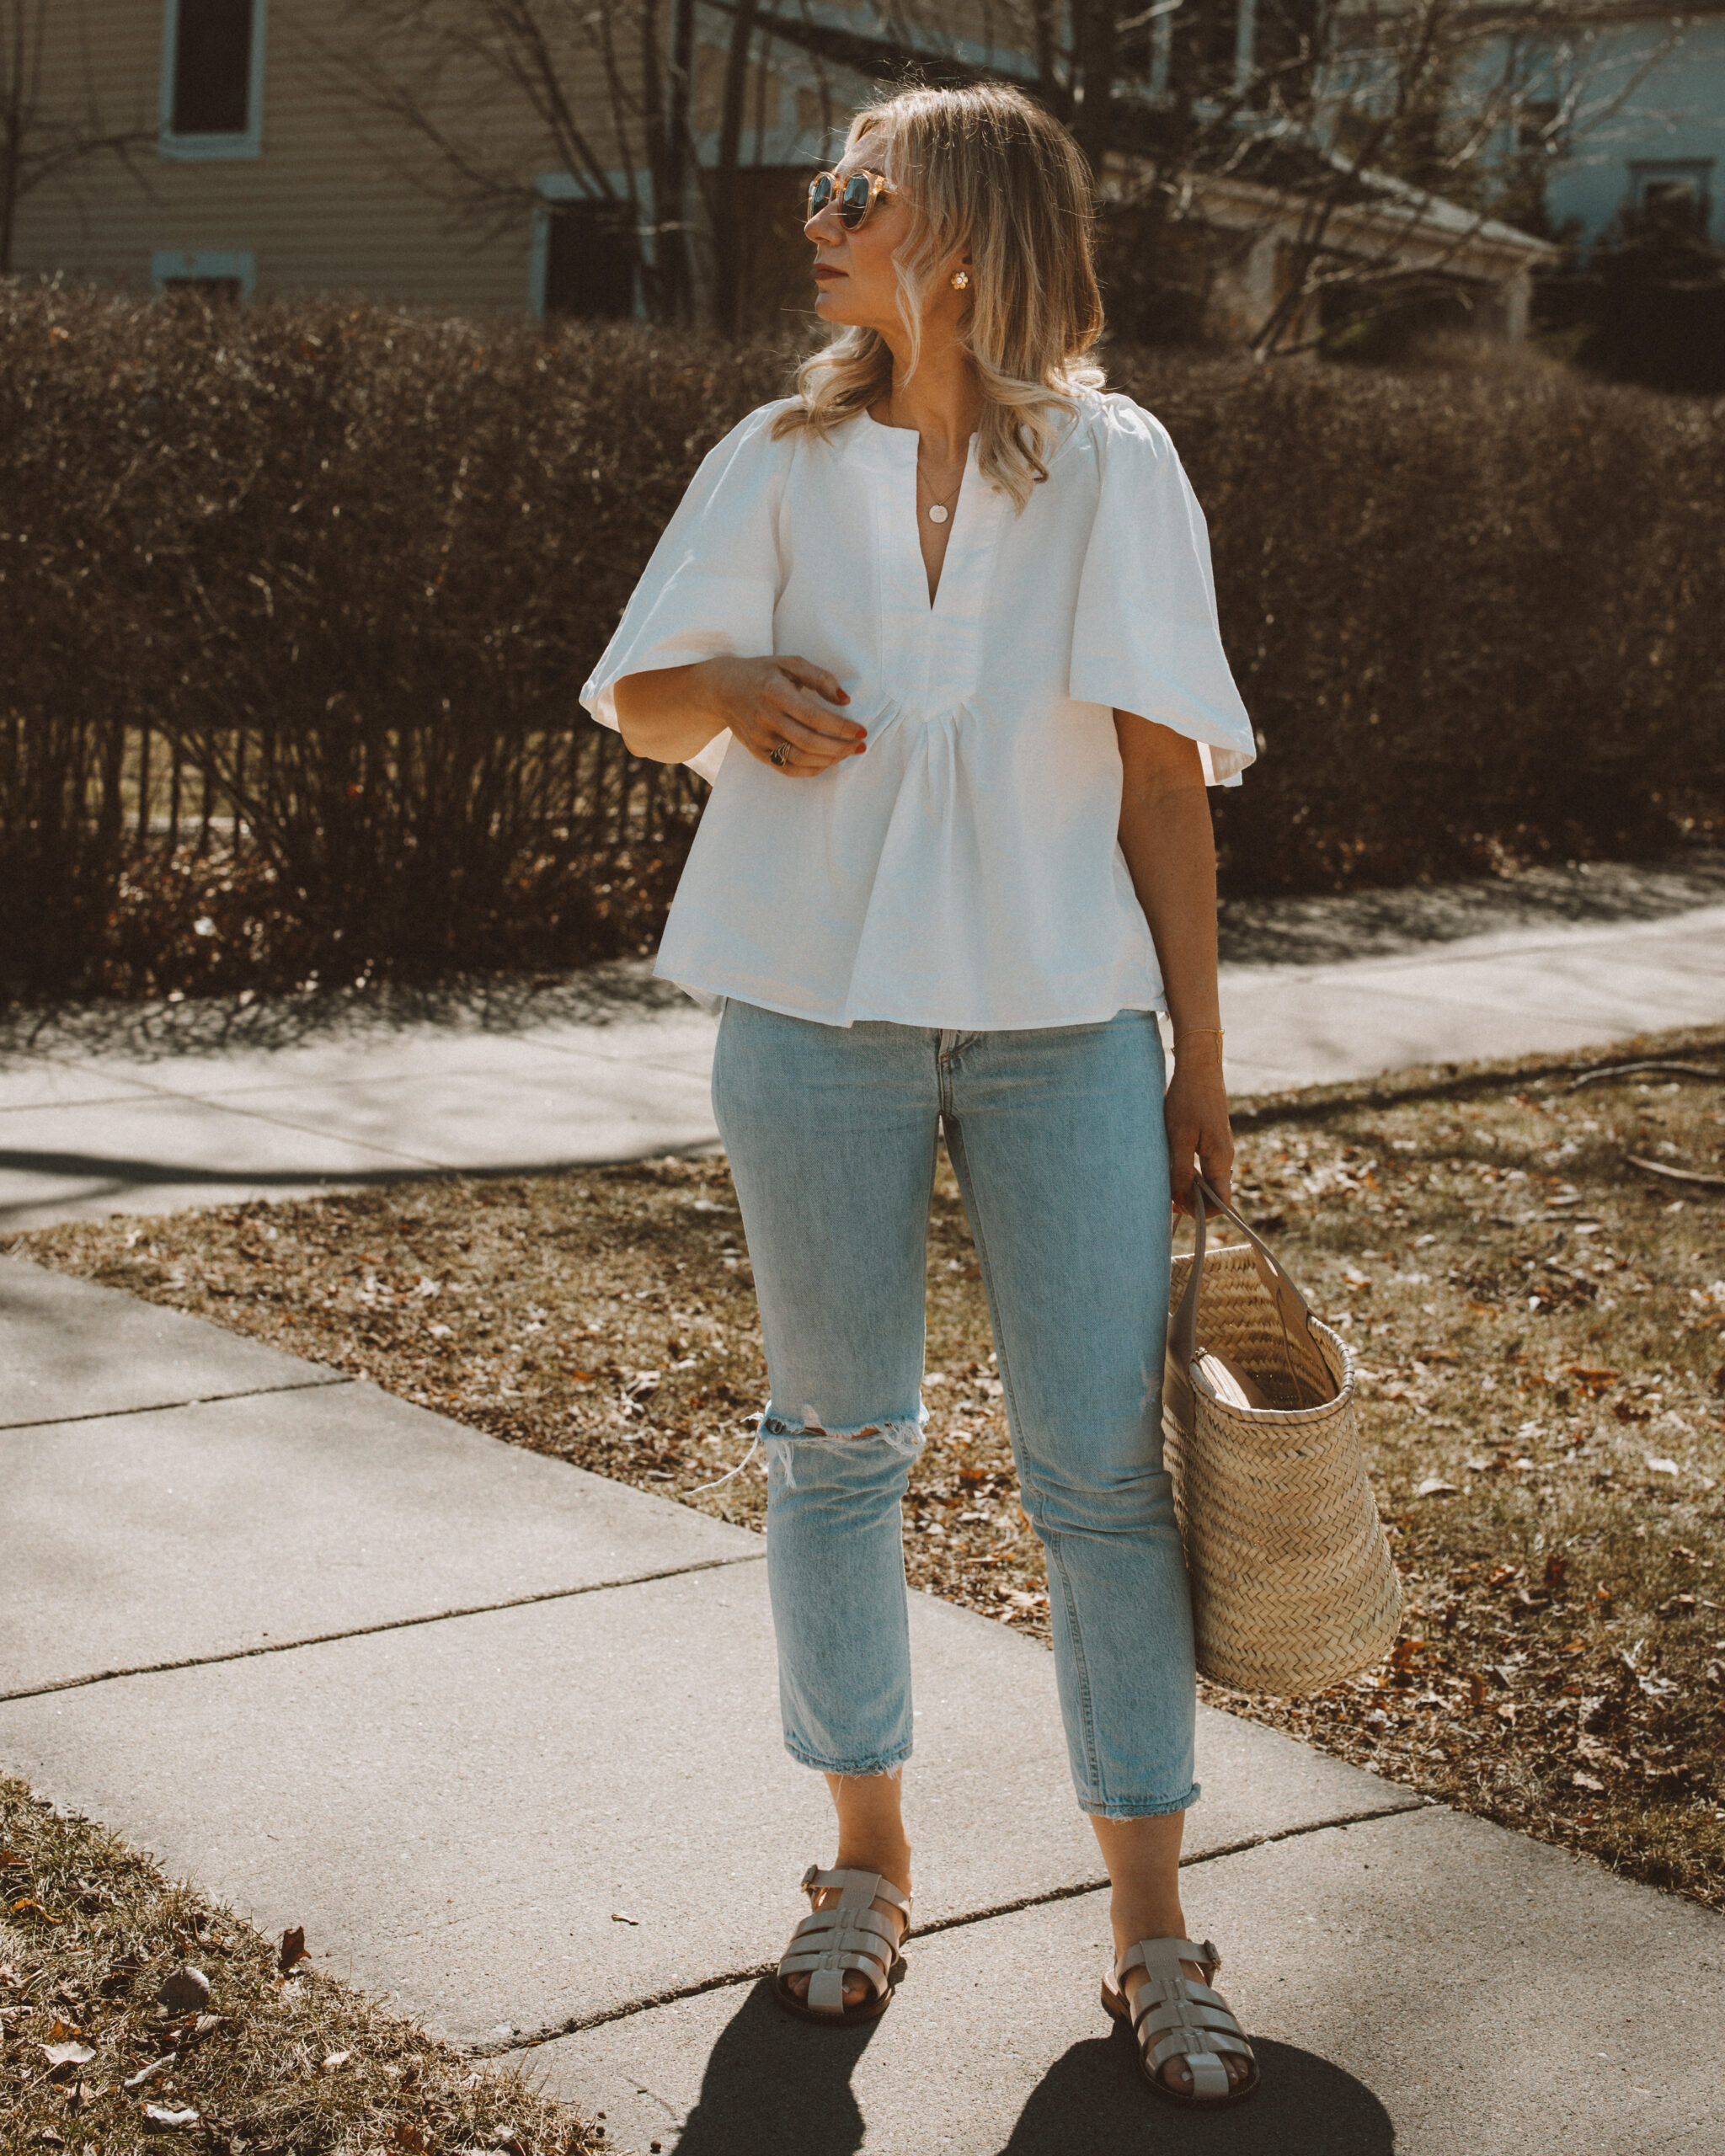 Karin Emily wears a white flutter sleeve blouse with a pair of light blue wash riley jeans from Agolde, a straw Cabas bag from Hereu, fisherman sandals from J. Crew, and clear framed sunglasses